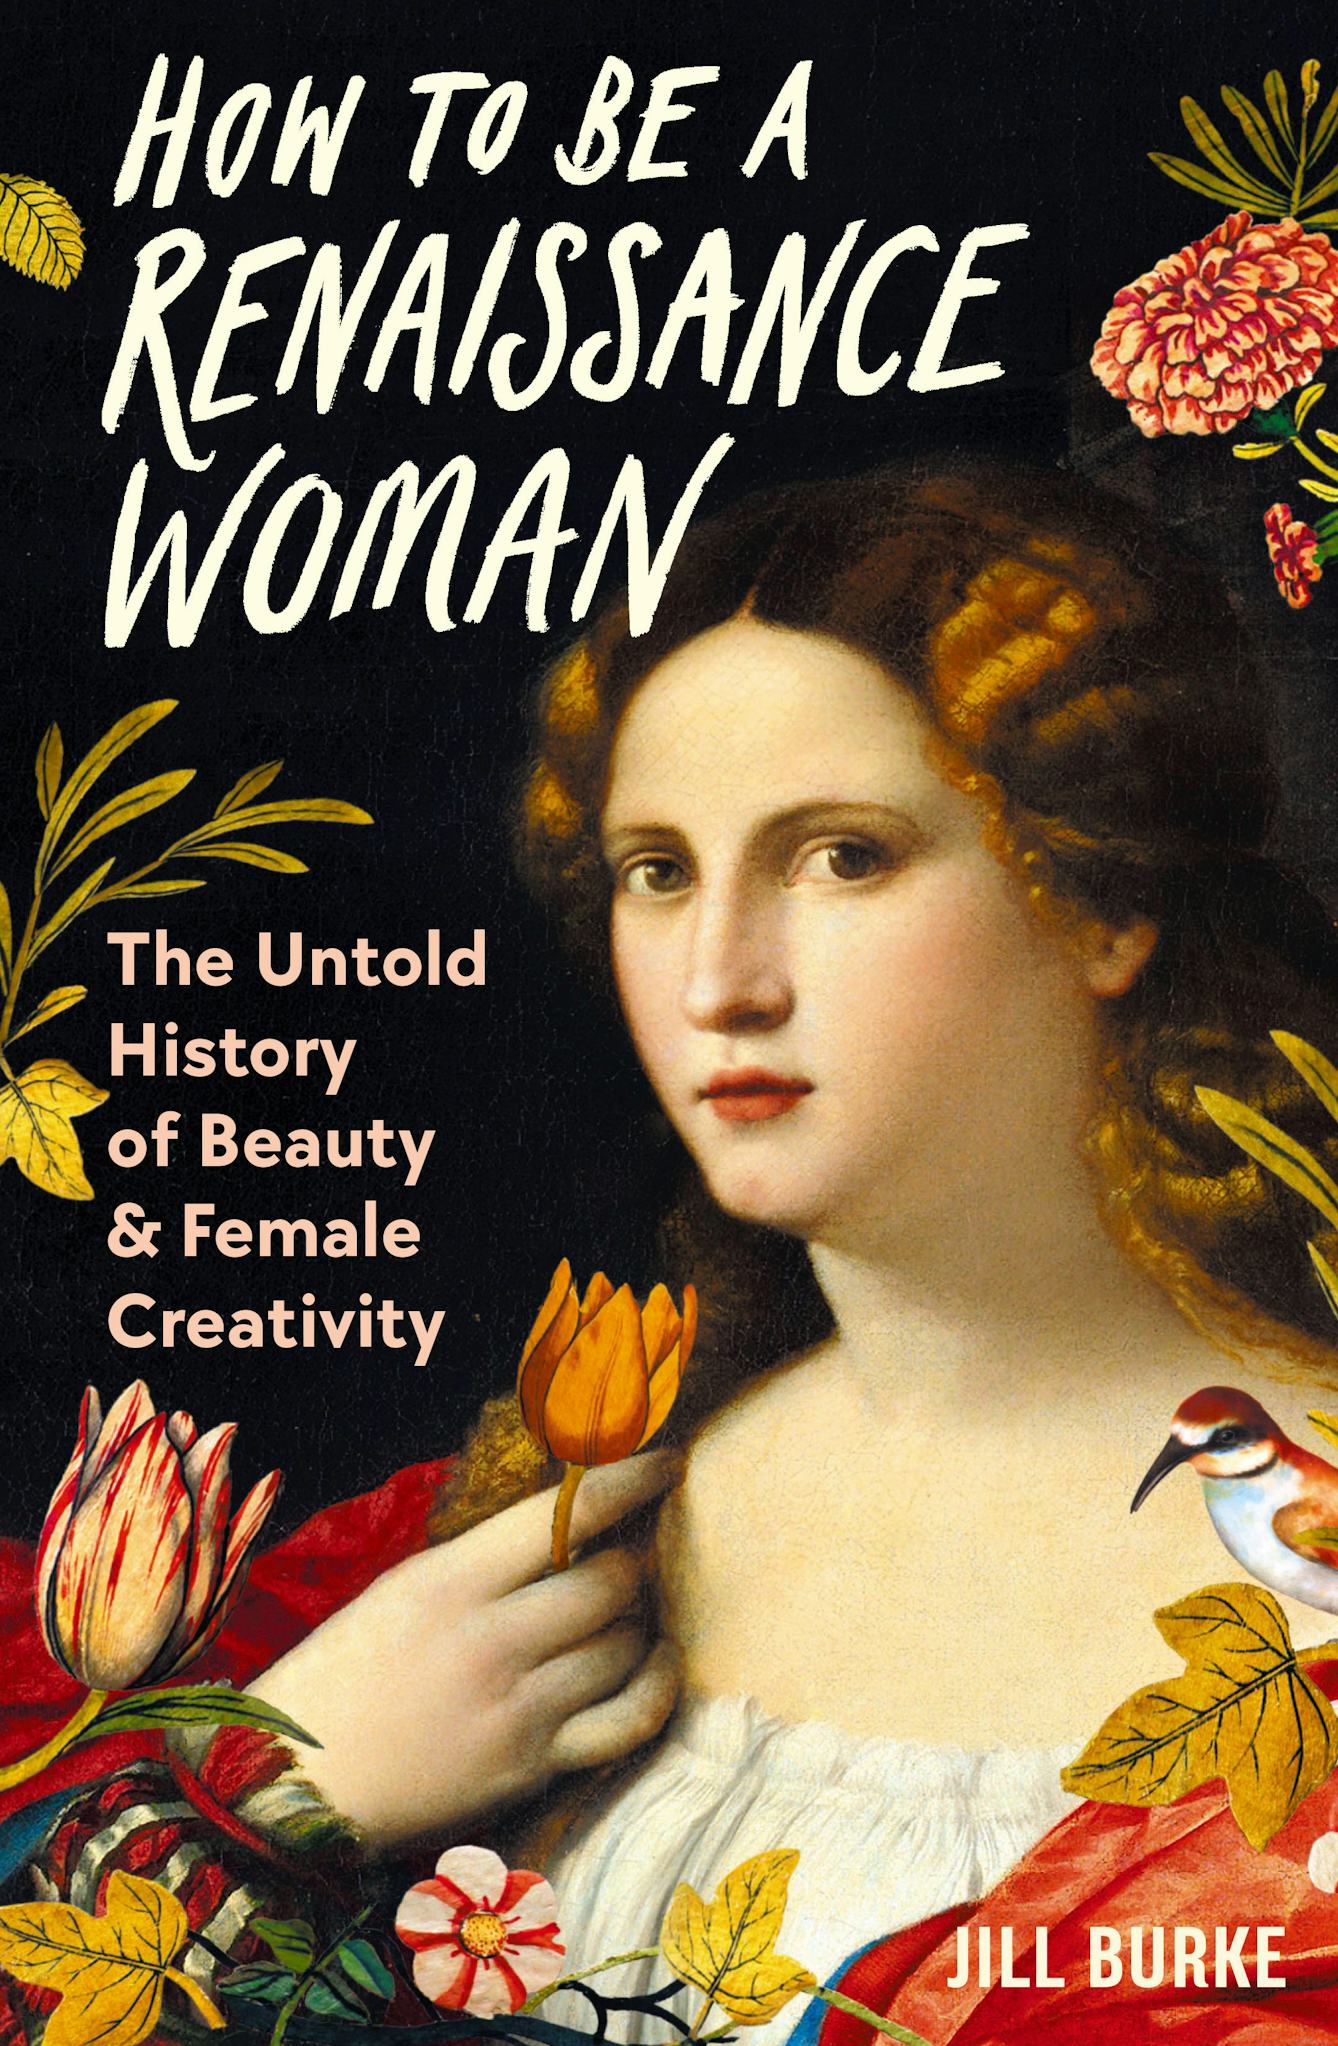 Book cover of 'How to be a Renaissance Woman' by Jill Burke